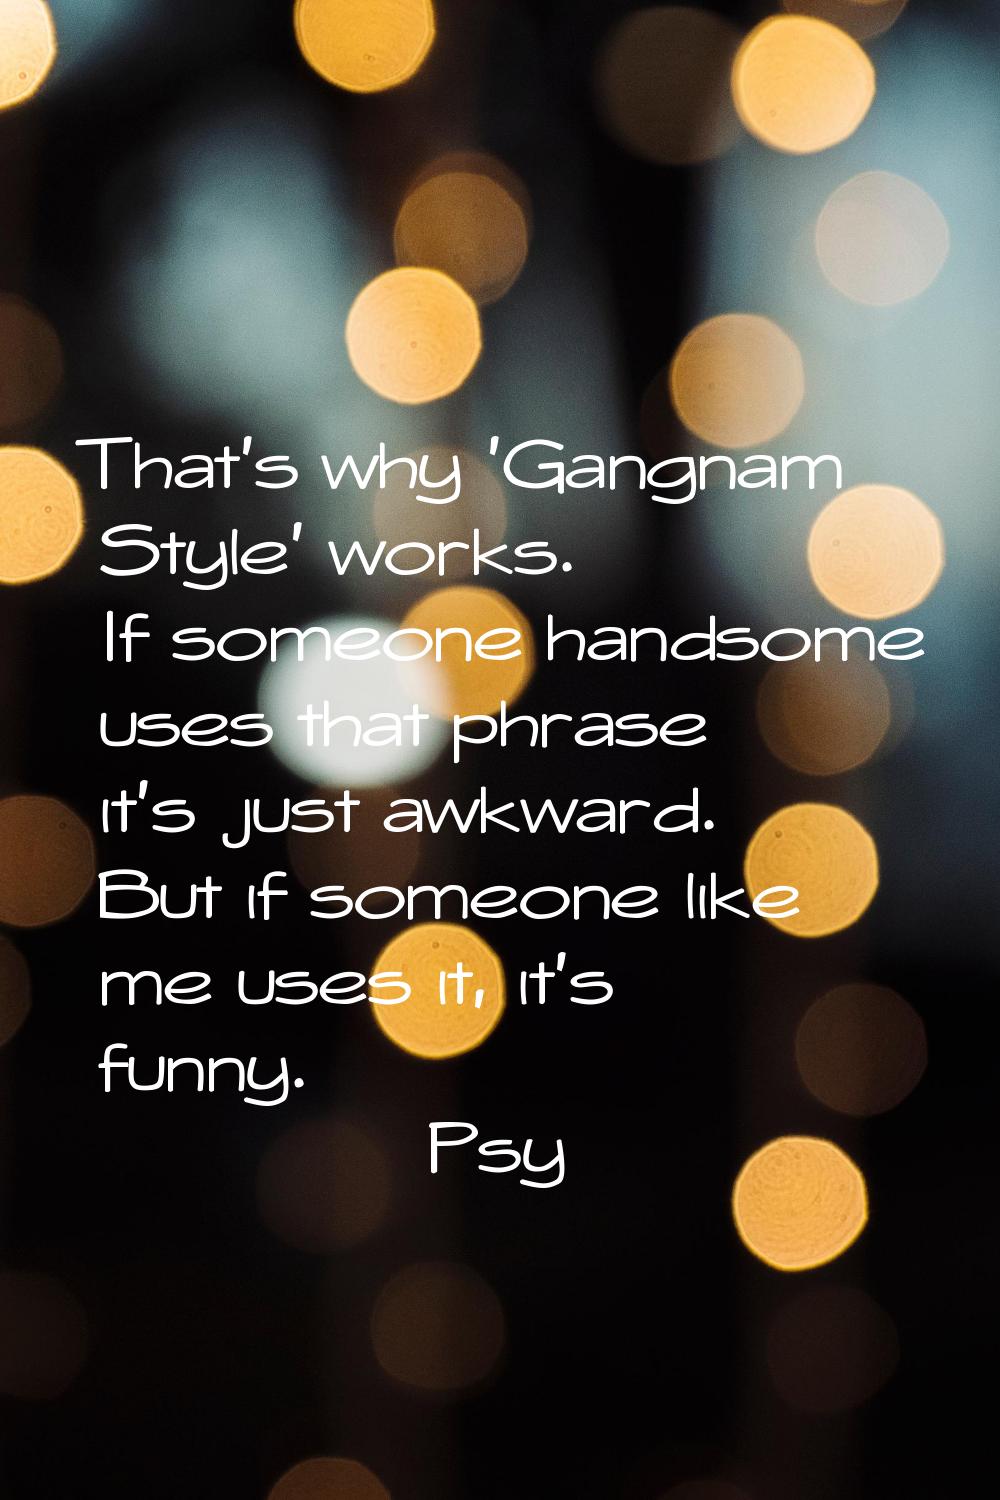 That's why 'Gangnam Style' works. If someone handsome uses that phrase it's just awkward. But if so